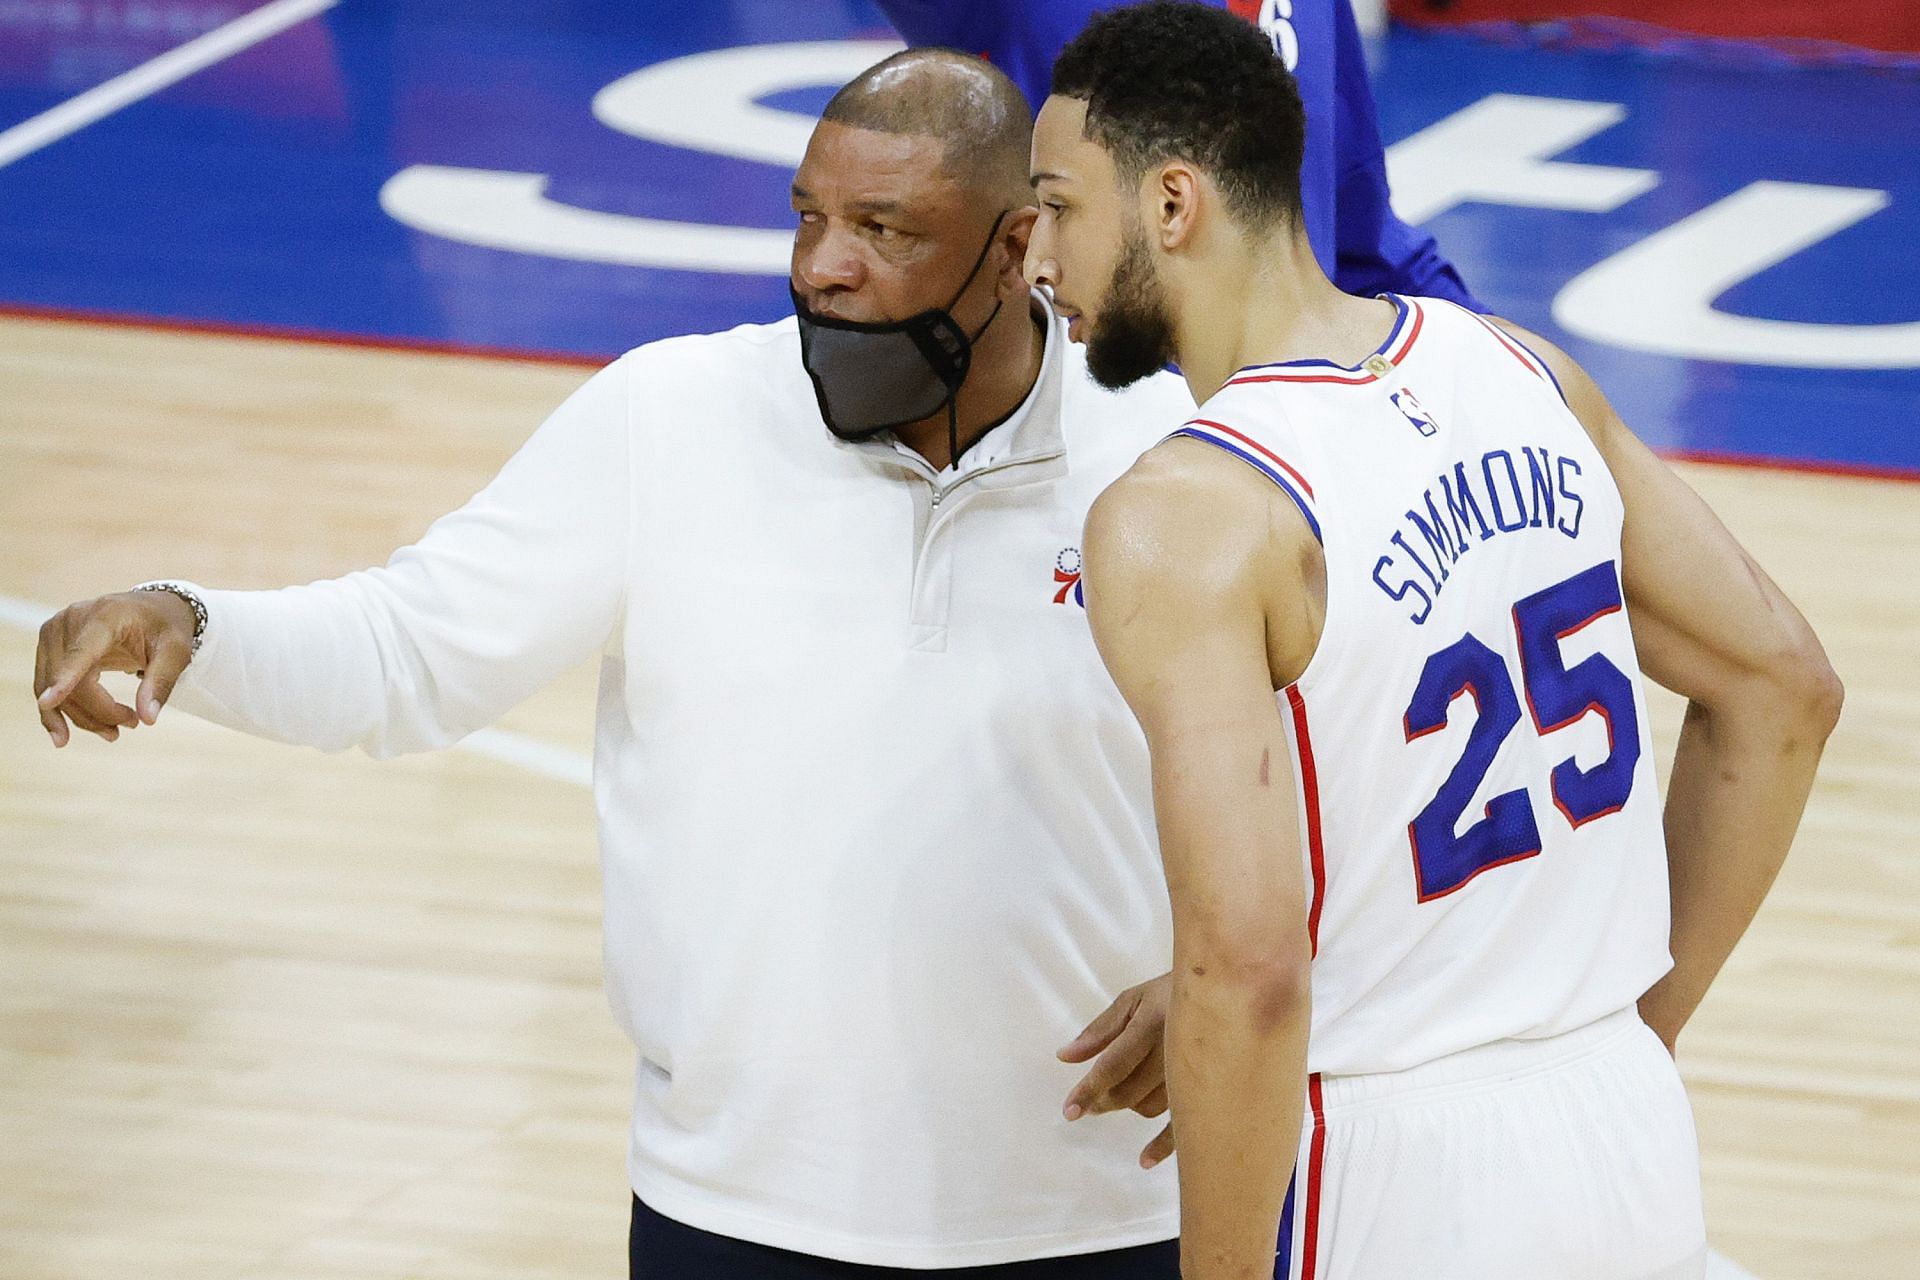 Doc Rivers cannot wait to face Ben Simmons, says he wants him to do well in Brooklyn